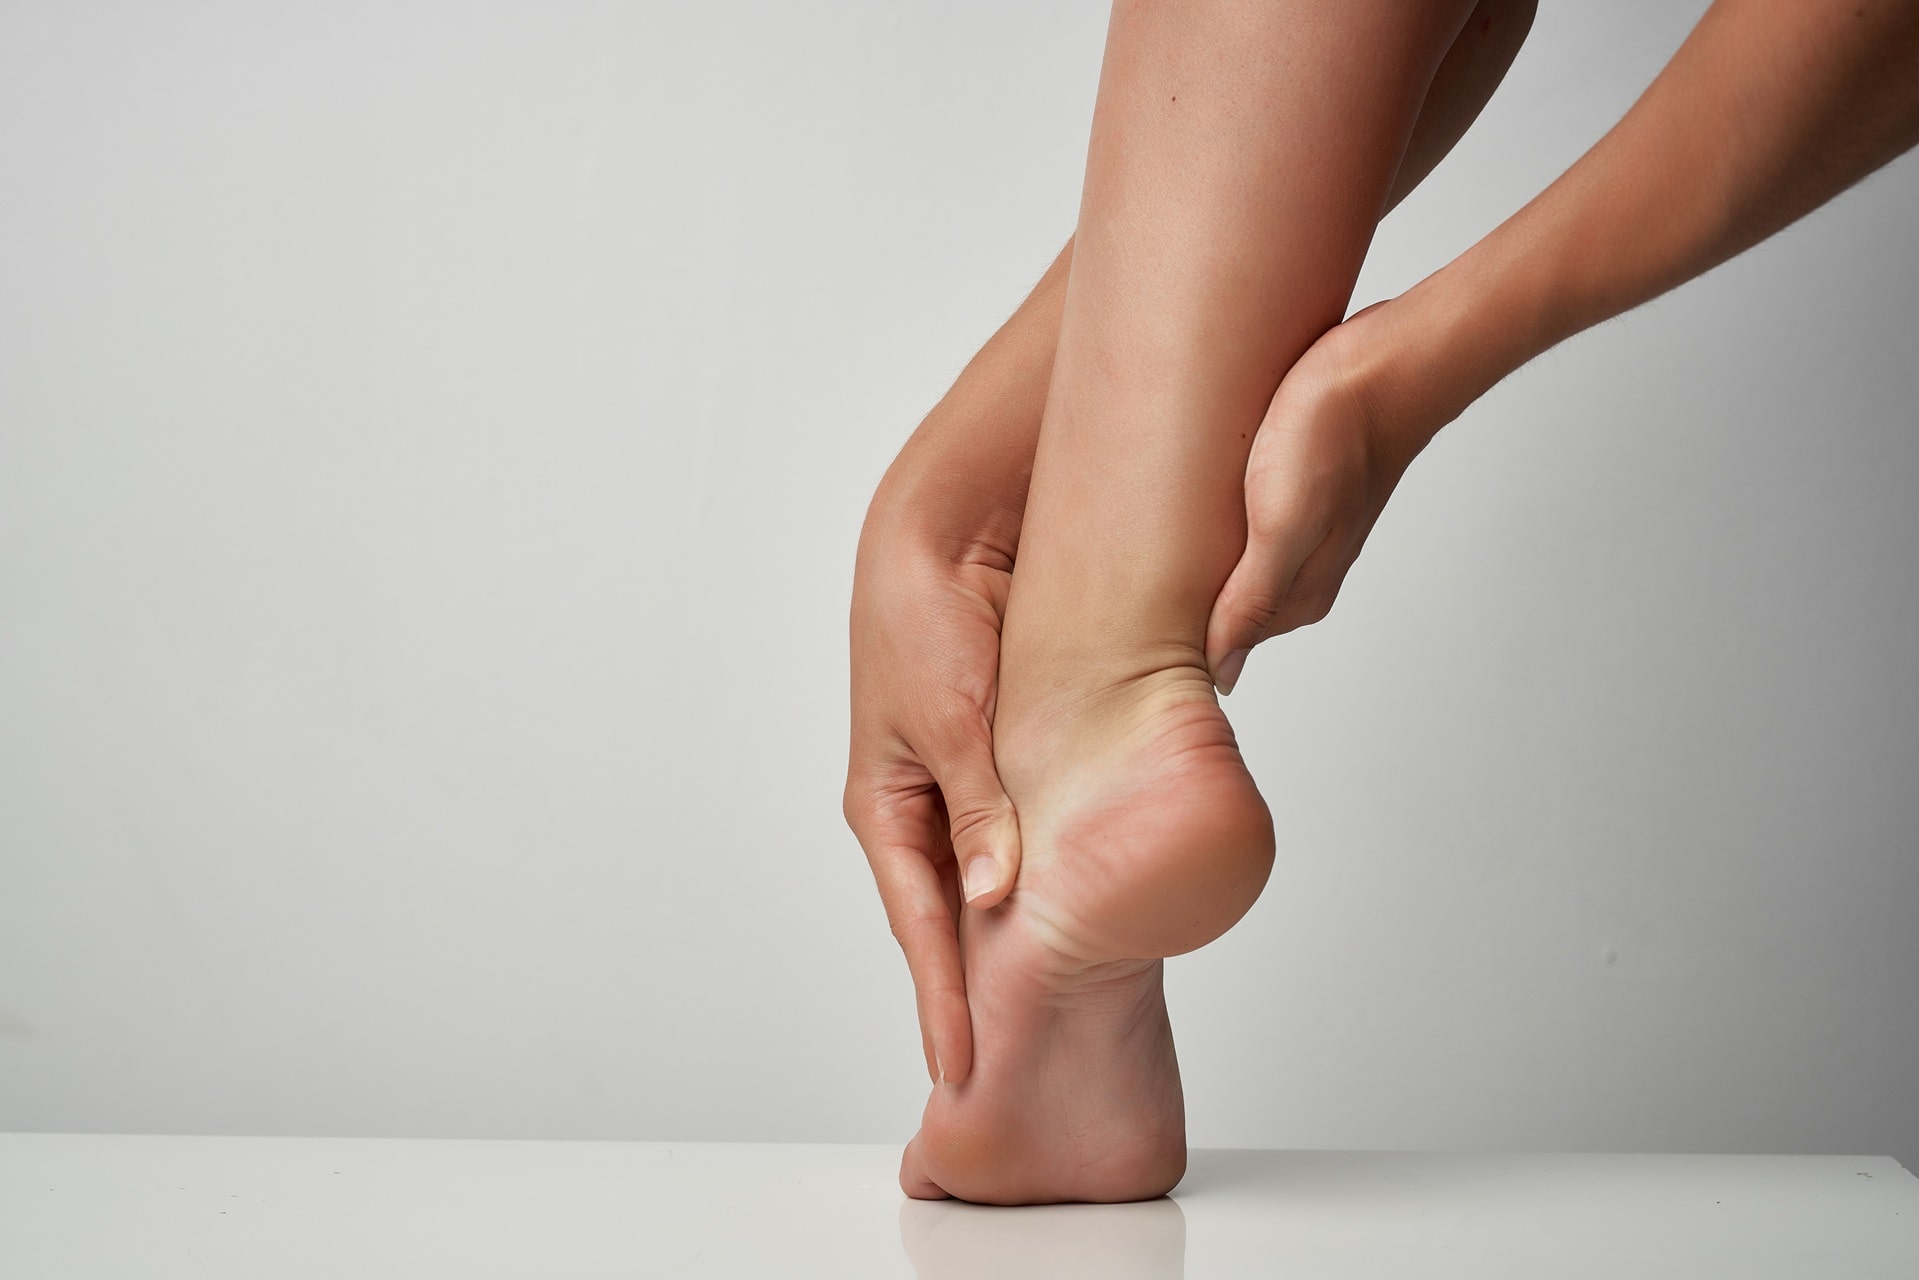 What Causes Heel Pain? How Does Heel Pain Go Away?